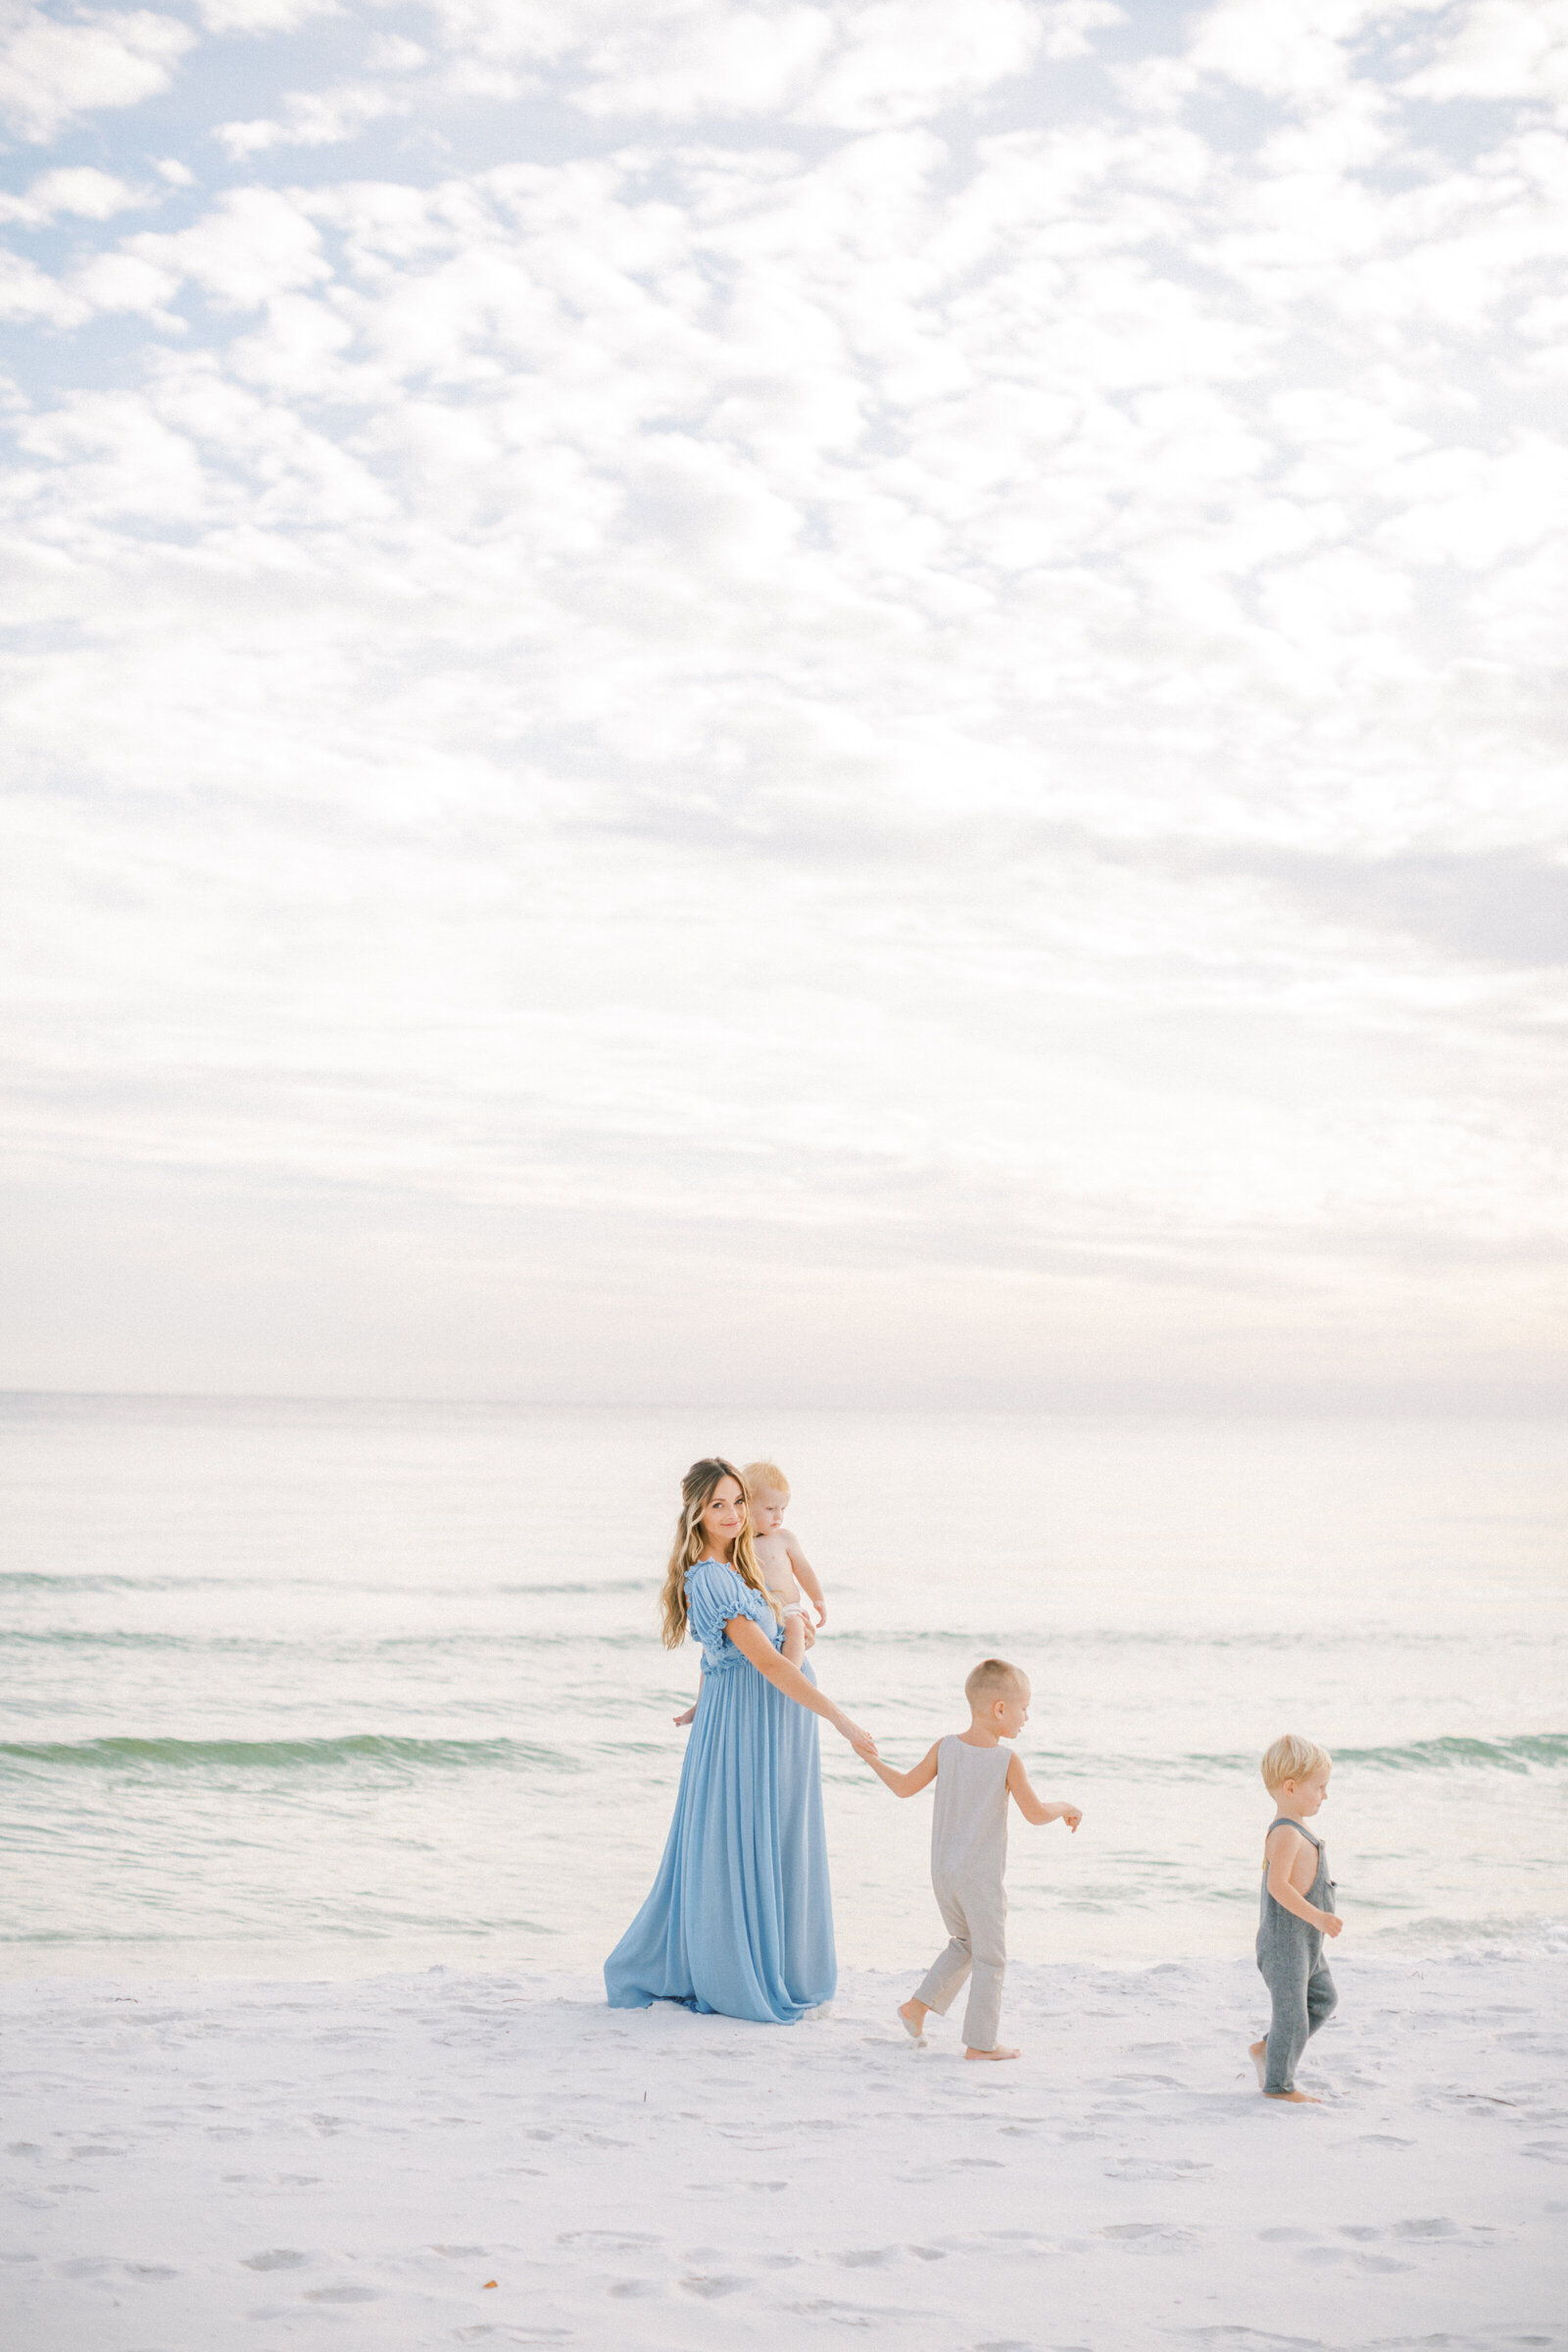 An expecting mother wearing a blue gown walks on the beach with her three sons